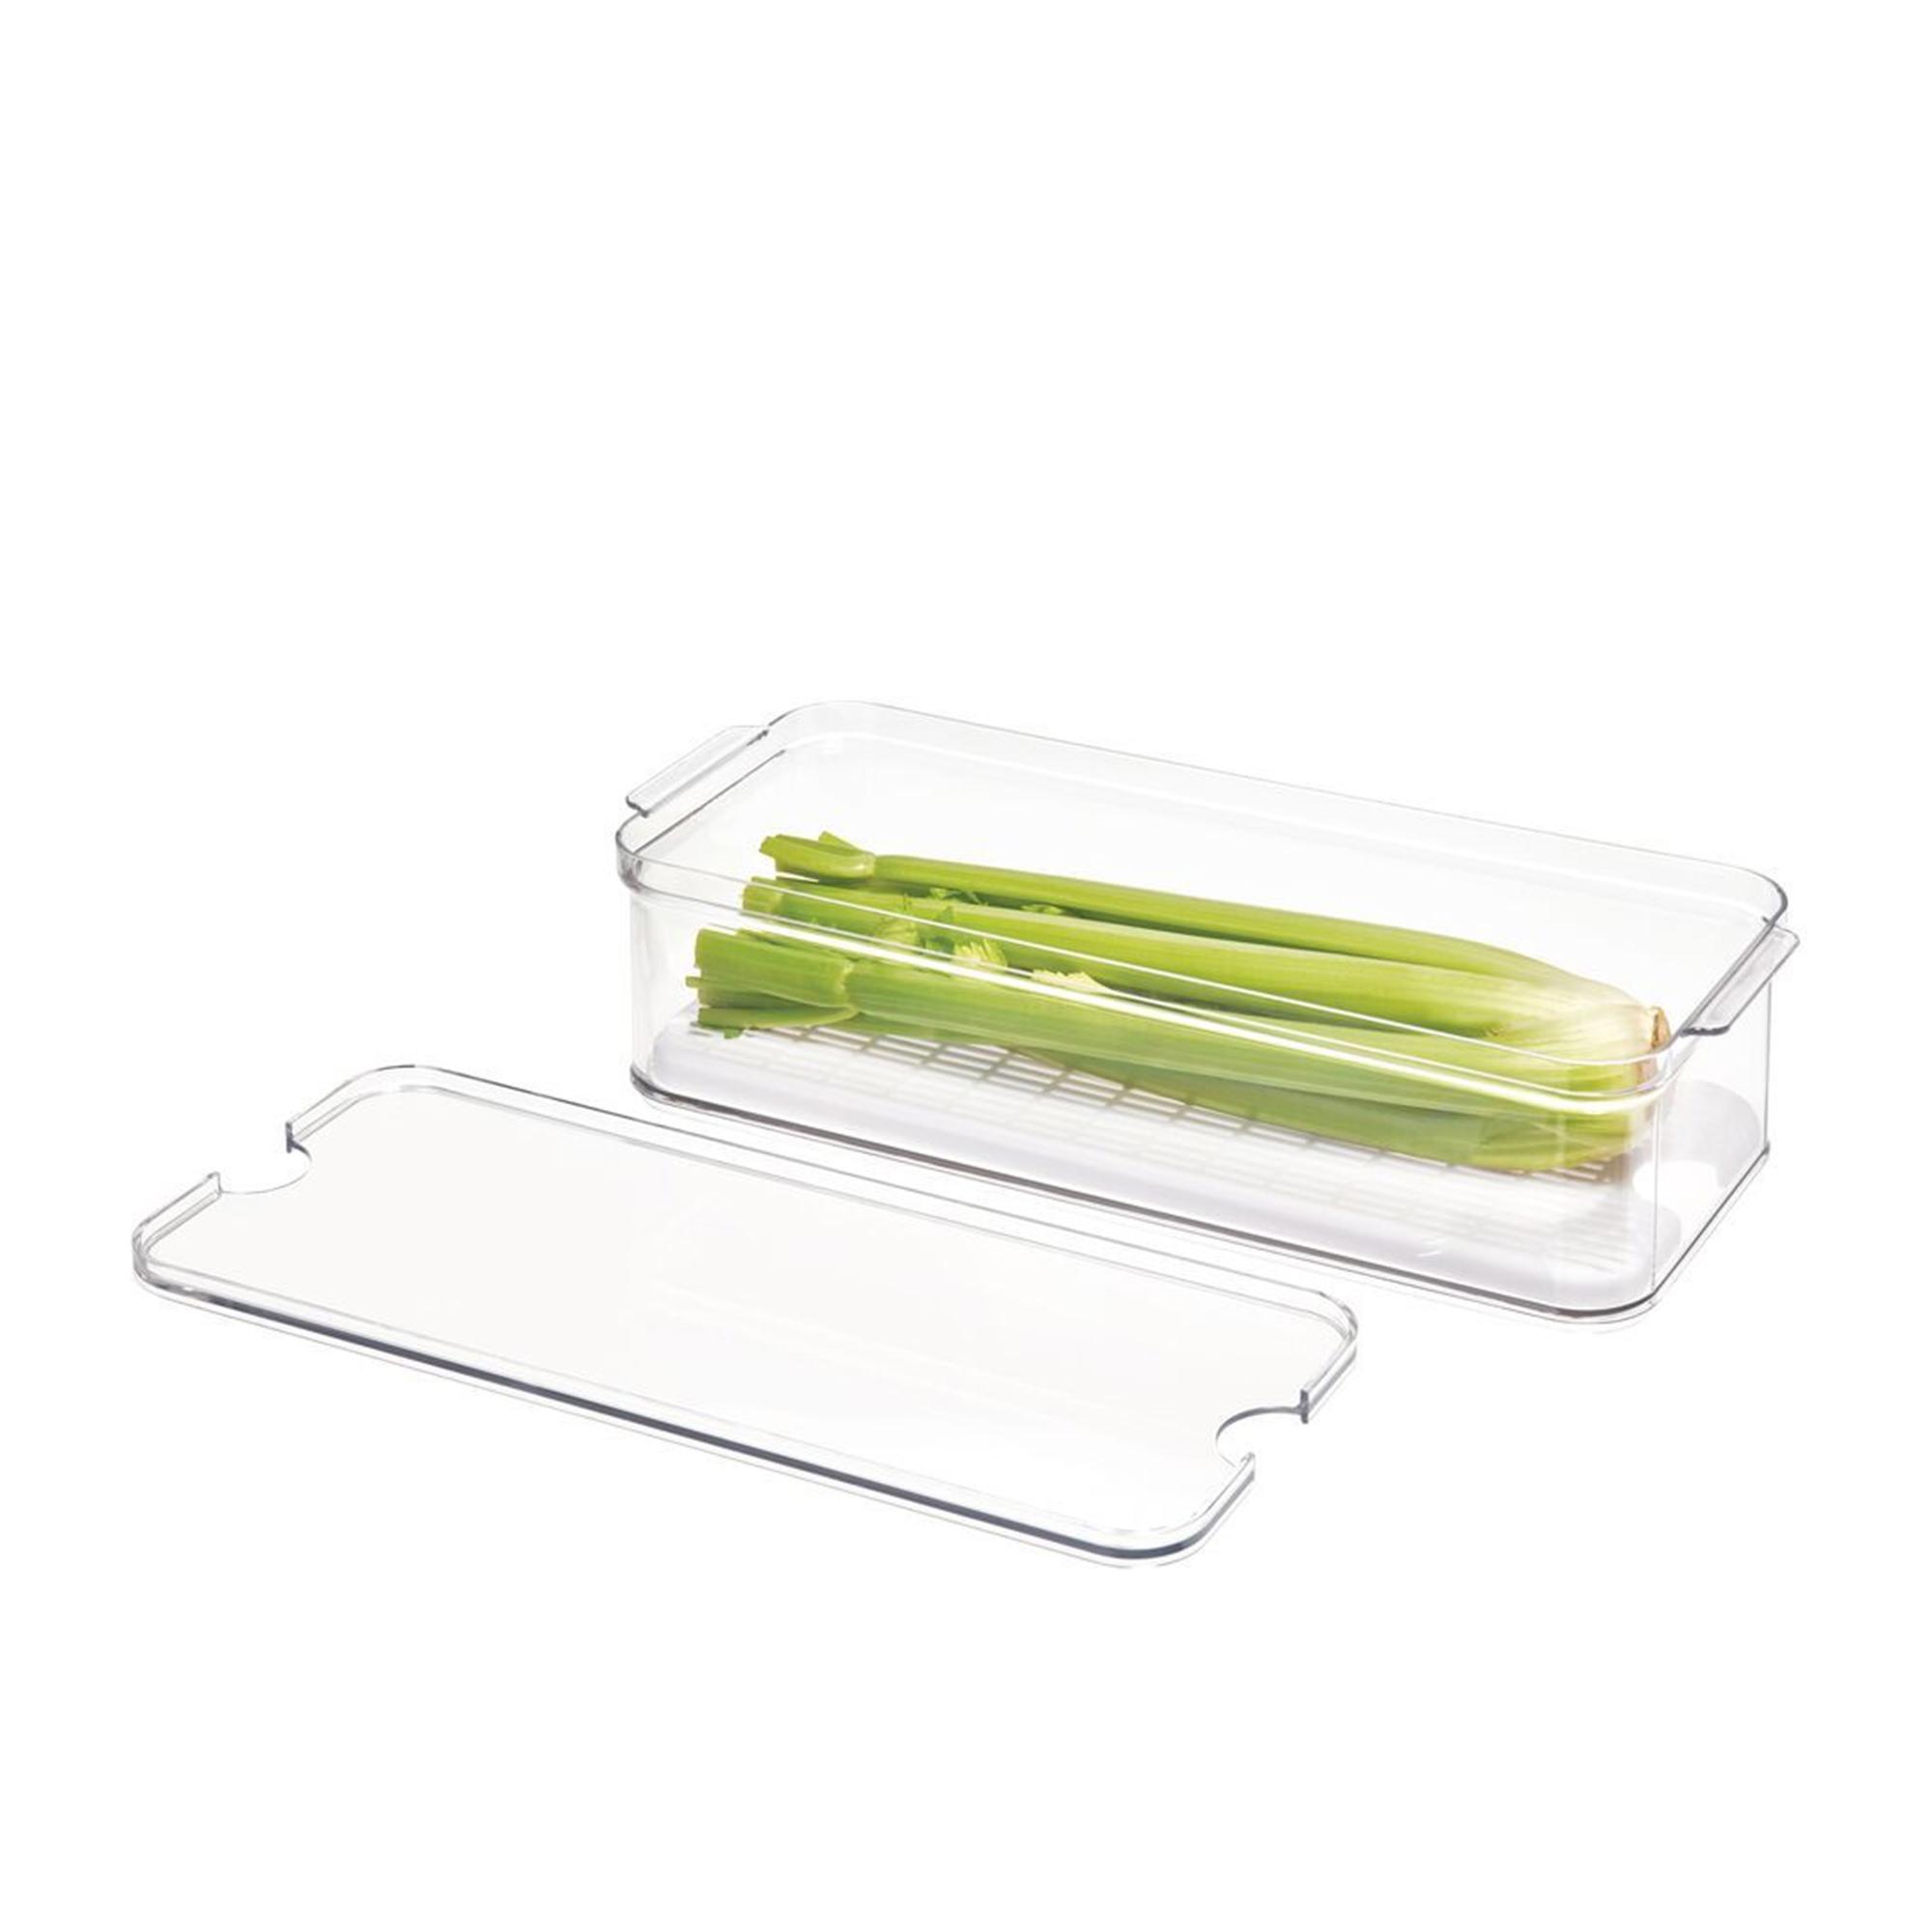 iDesign Crisp Produce Bin with Lid Clear Image 6